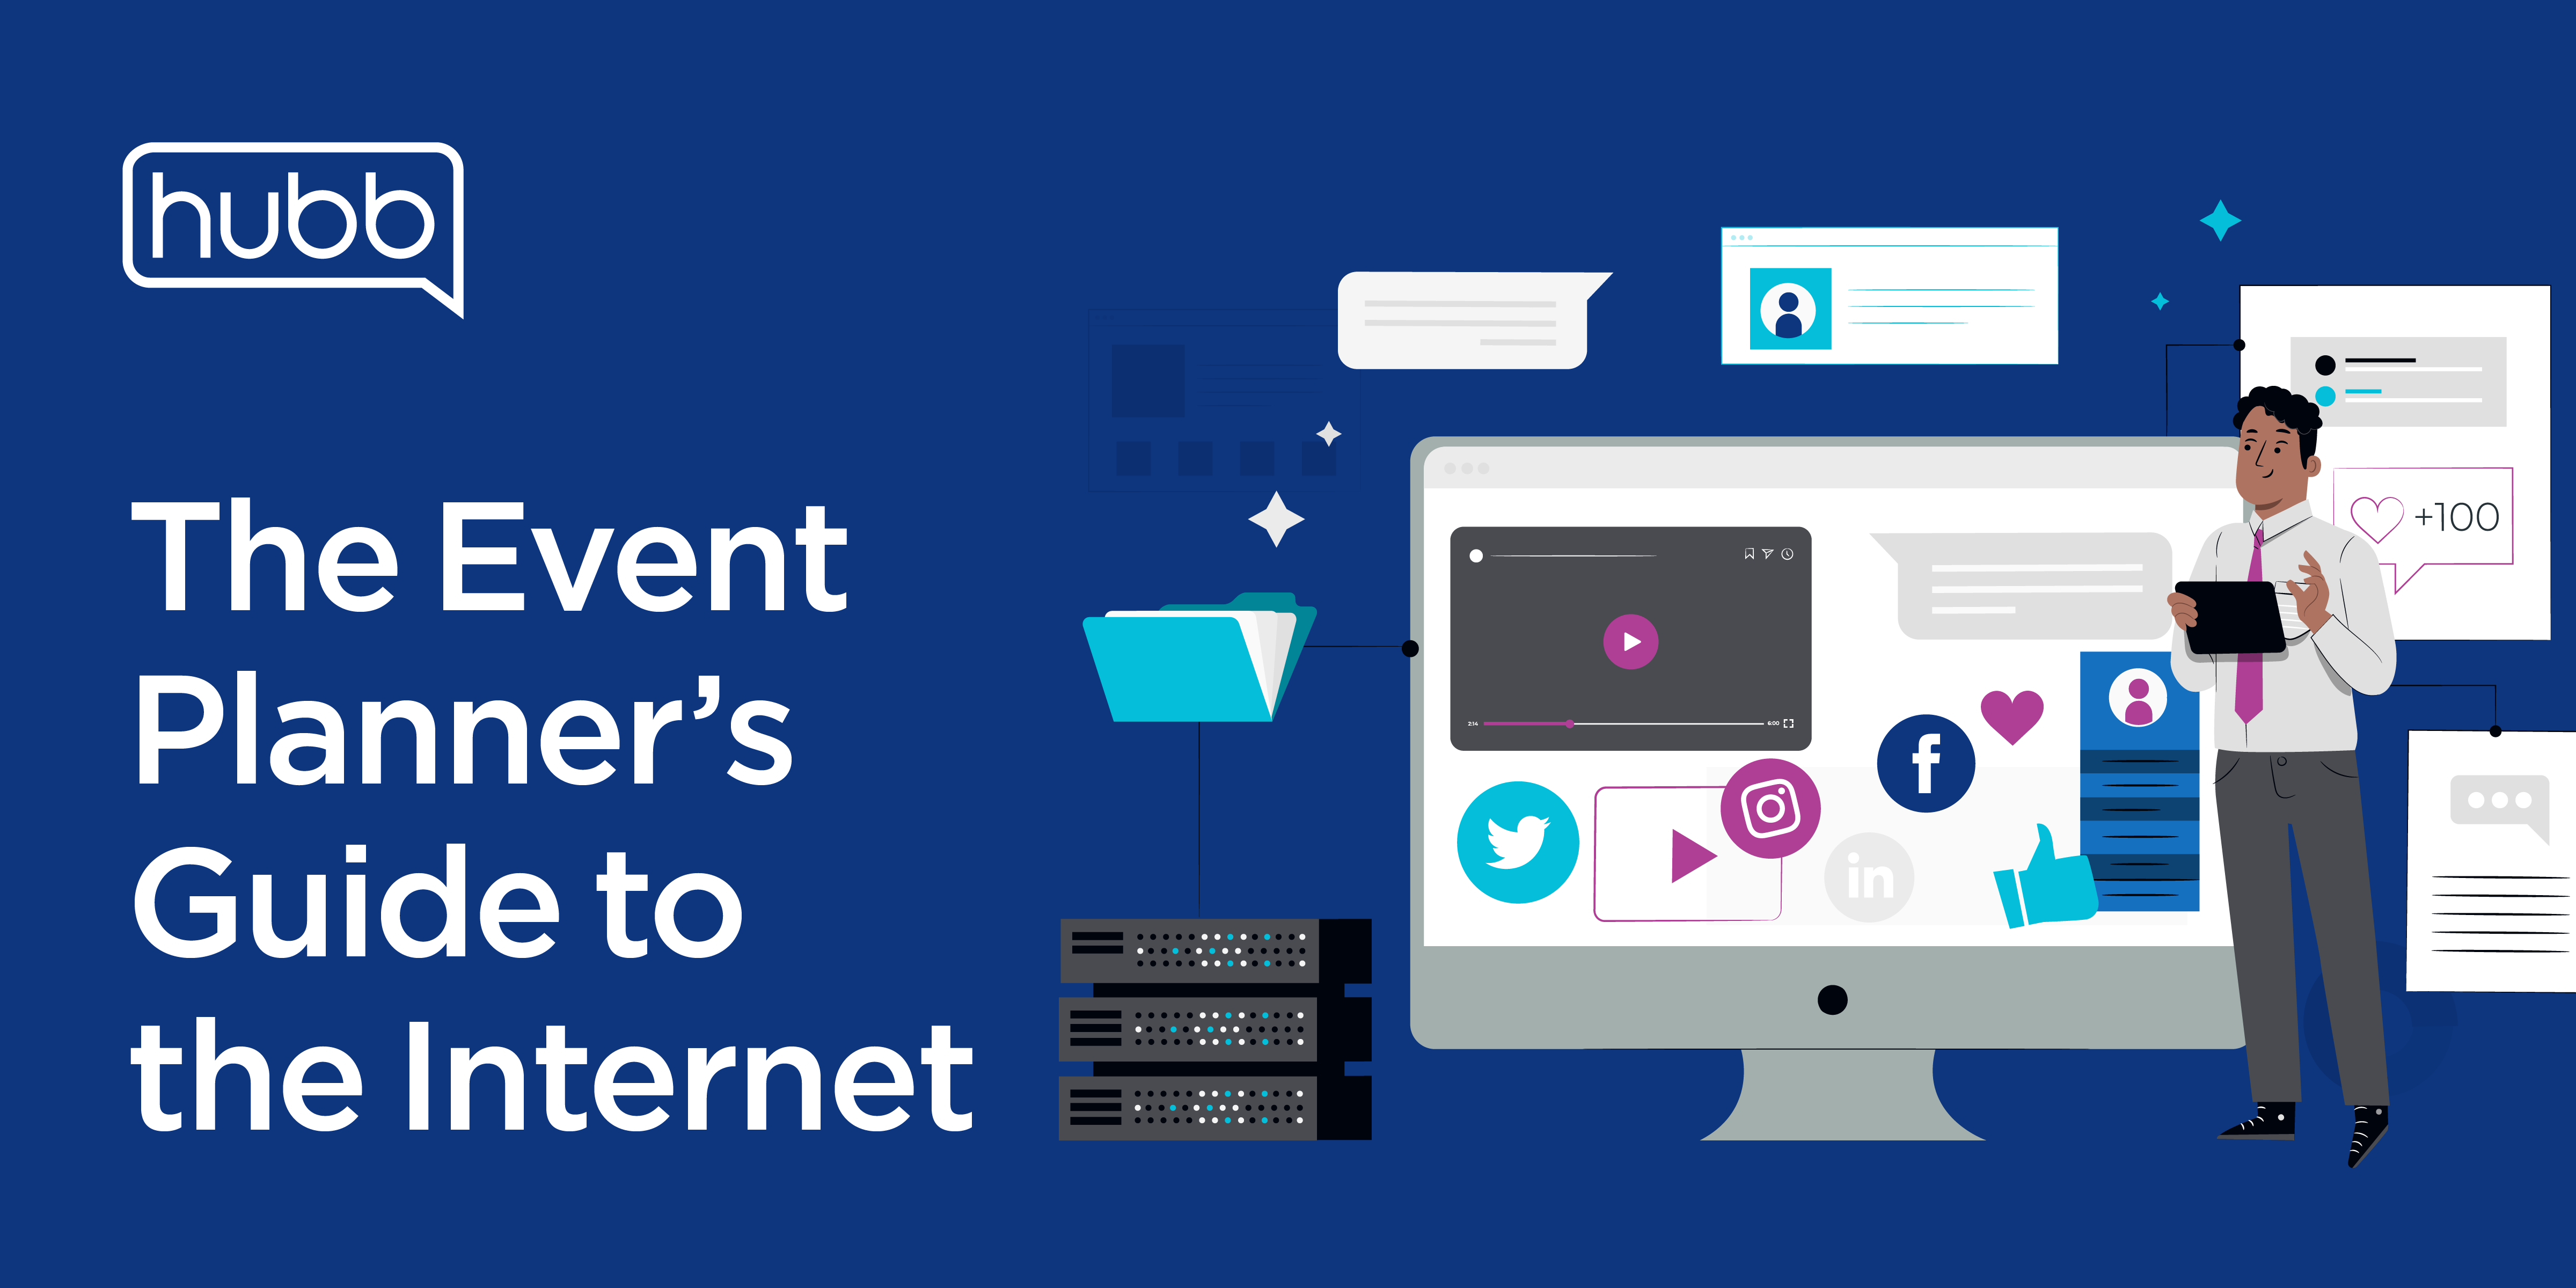 The Event Planner's Guide to the Internet